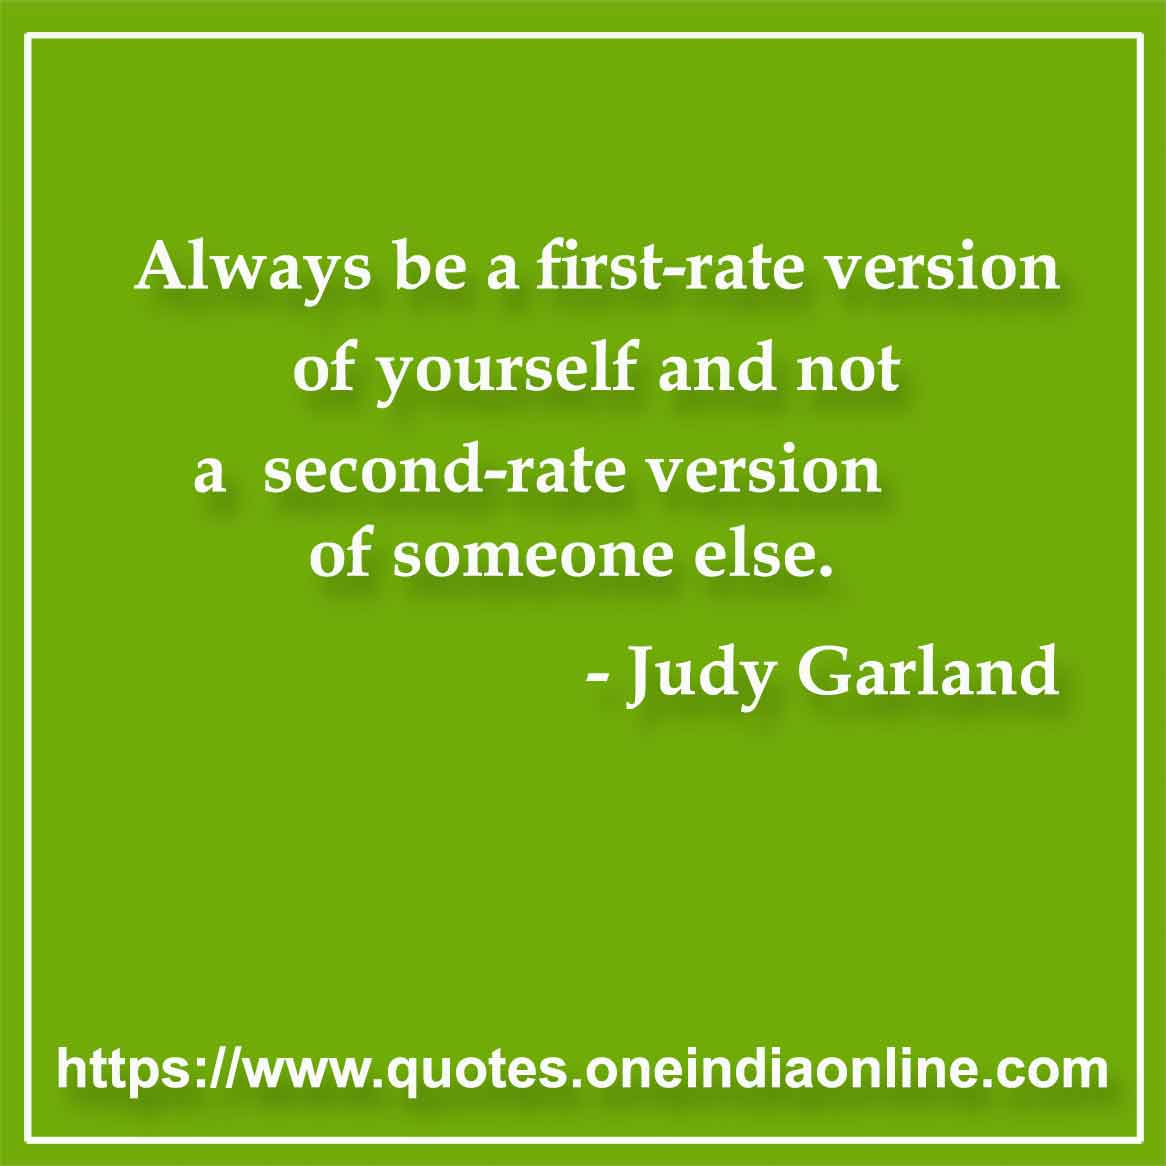 Always be a first-rate version of yourself and not a second-rate version of someone else.

- Judy Garland